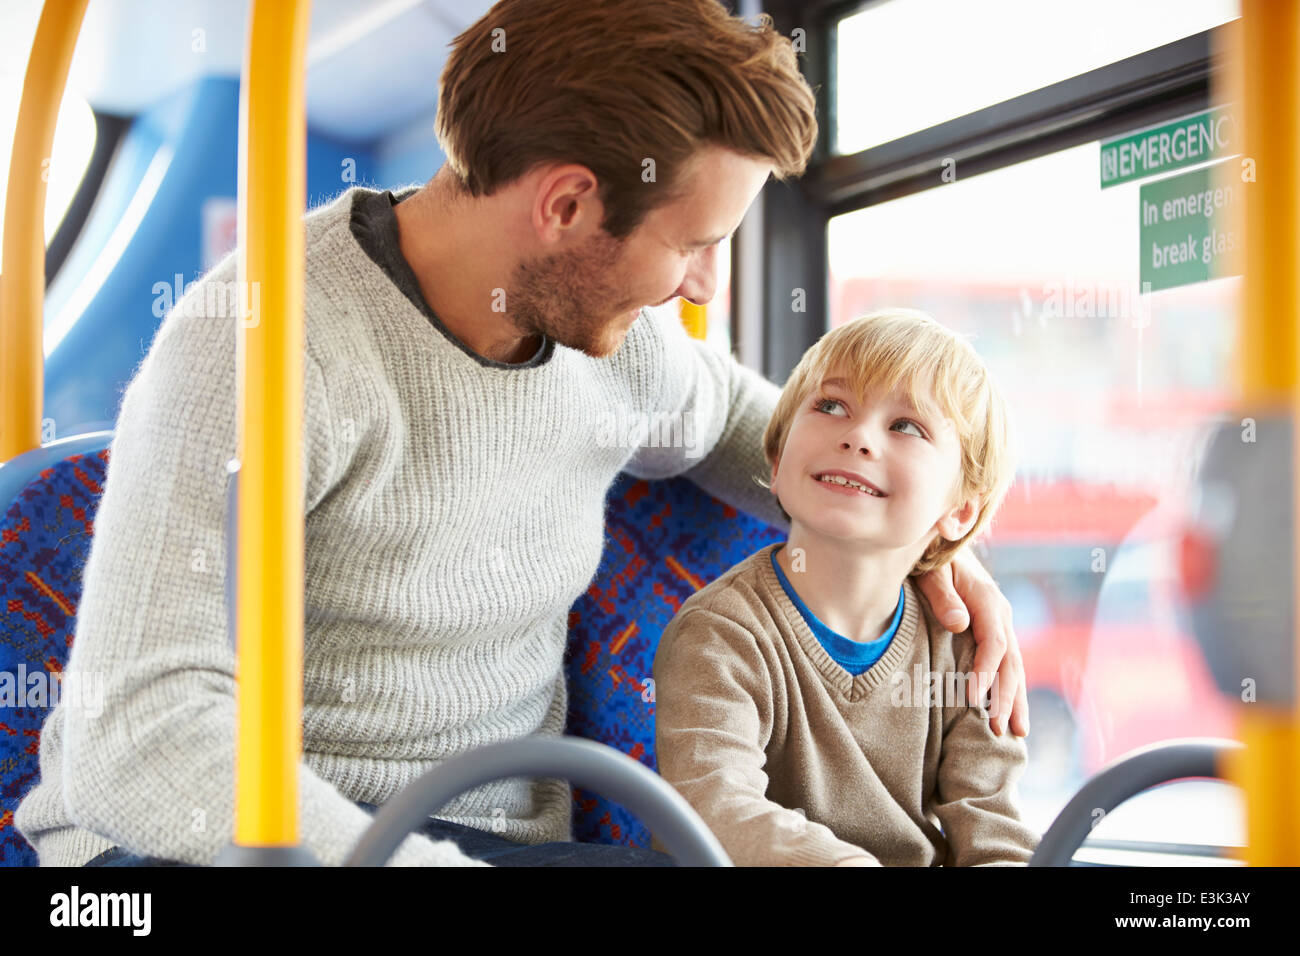 Father And Son Enjoying Bus Journey Together Stock Photo